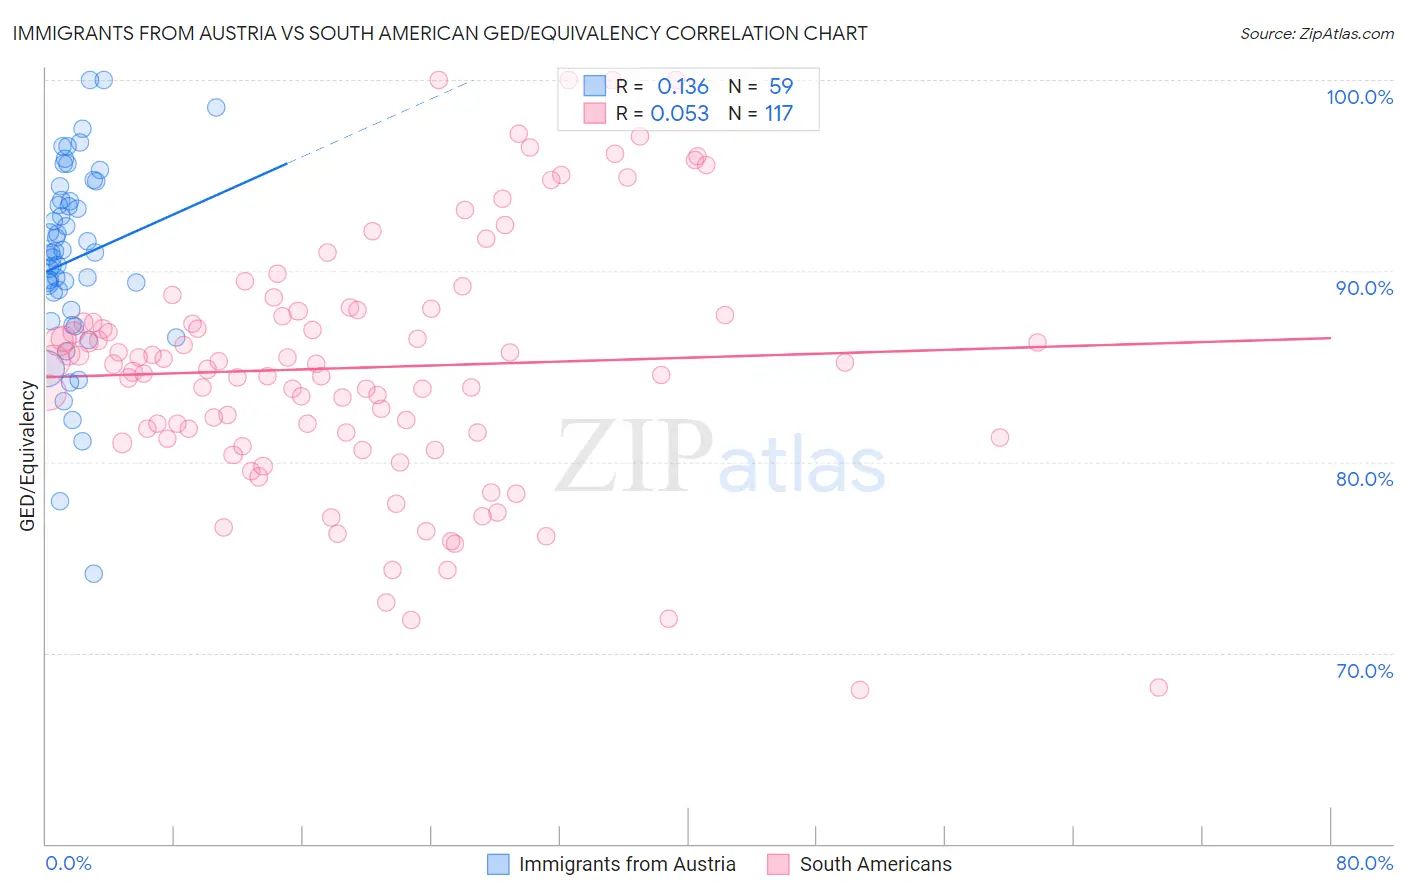 Immigrants from Austria vs South American GED/Equivalency